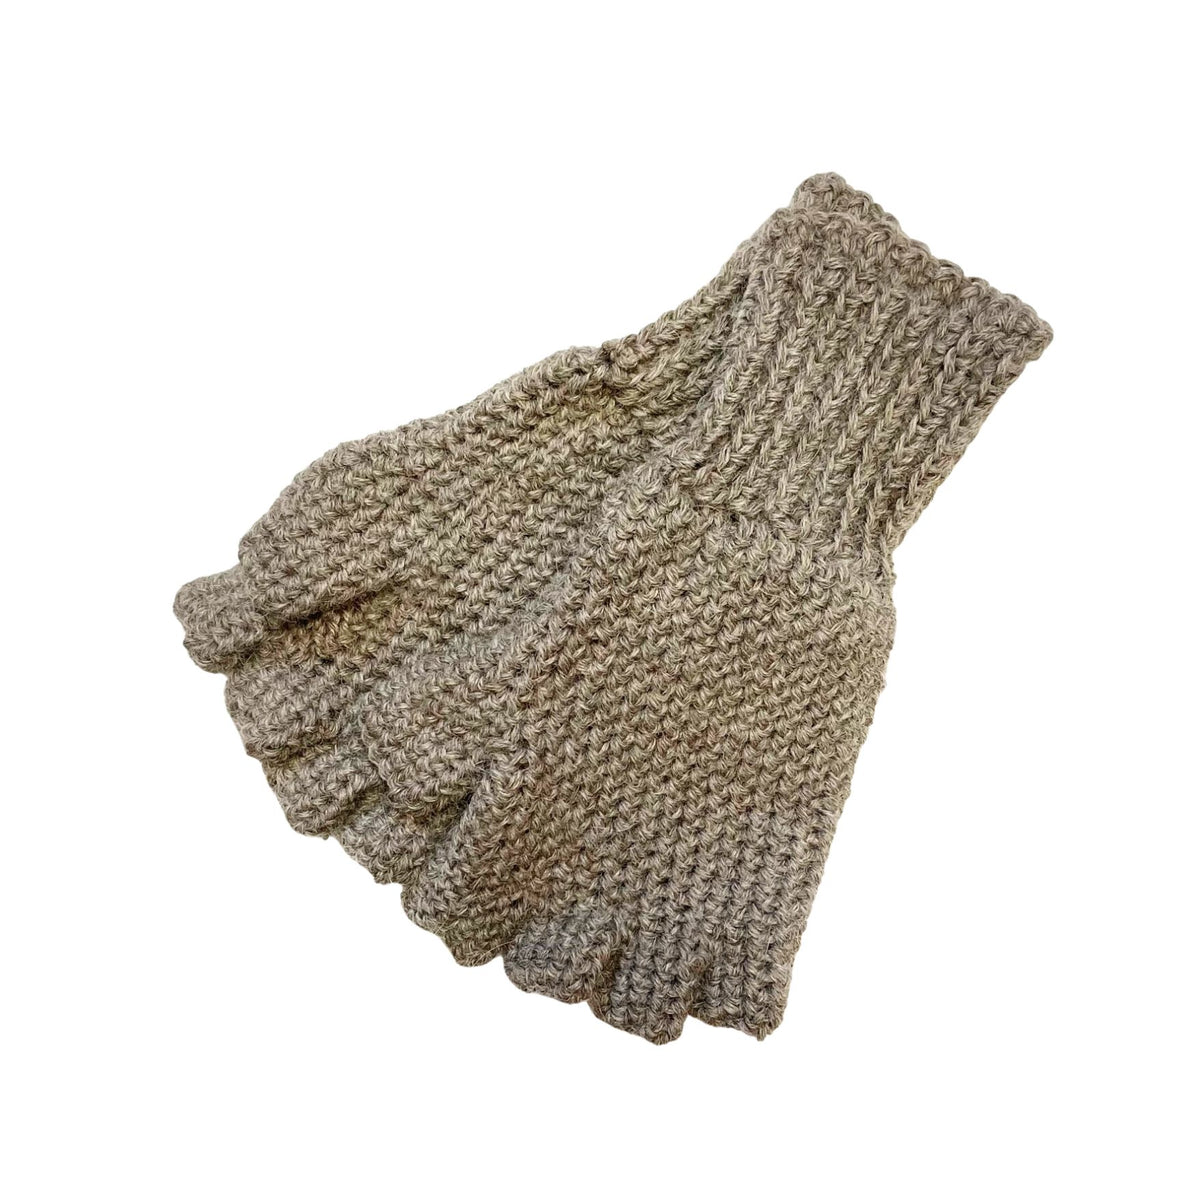 A product photo with a white background of a hand wearing a soft cozy comfortable fashionable moisture wicking knitted crochet fingerless gloves handmade in Montana from latte brown alpaca wool yarn.